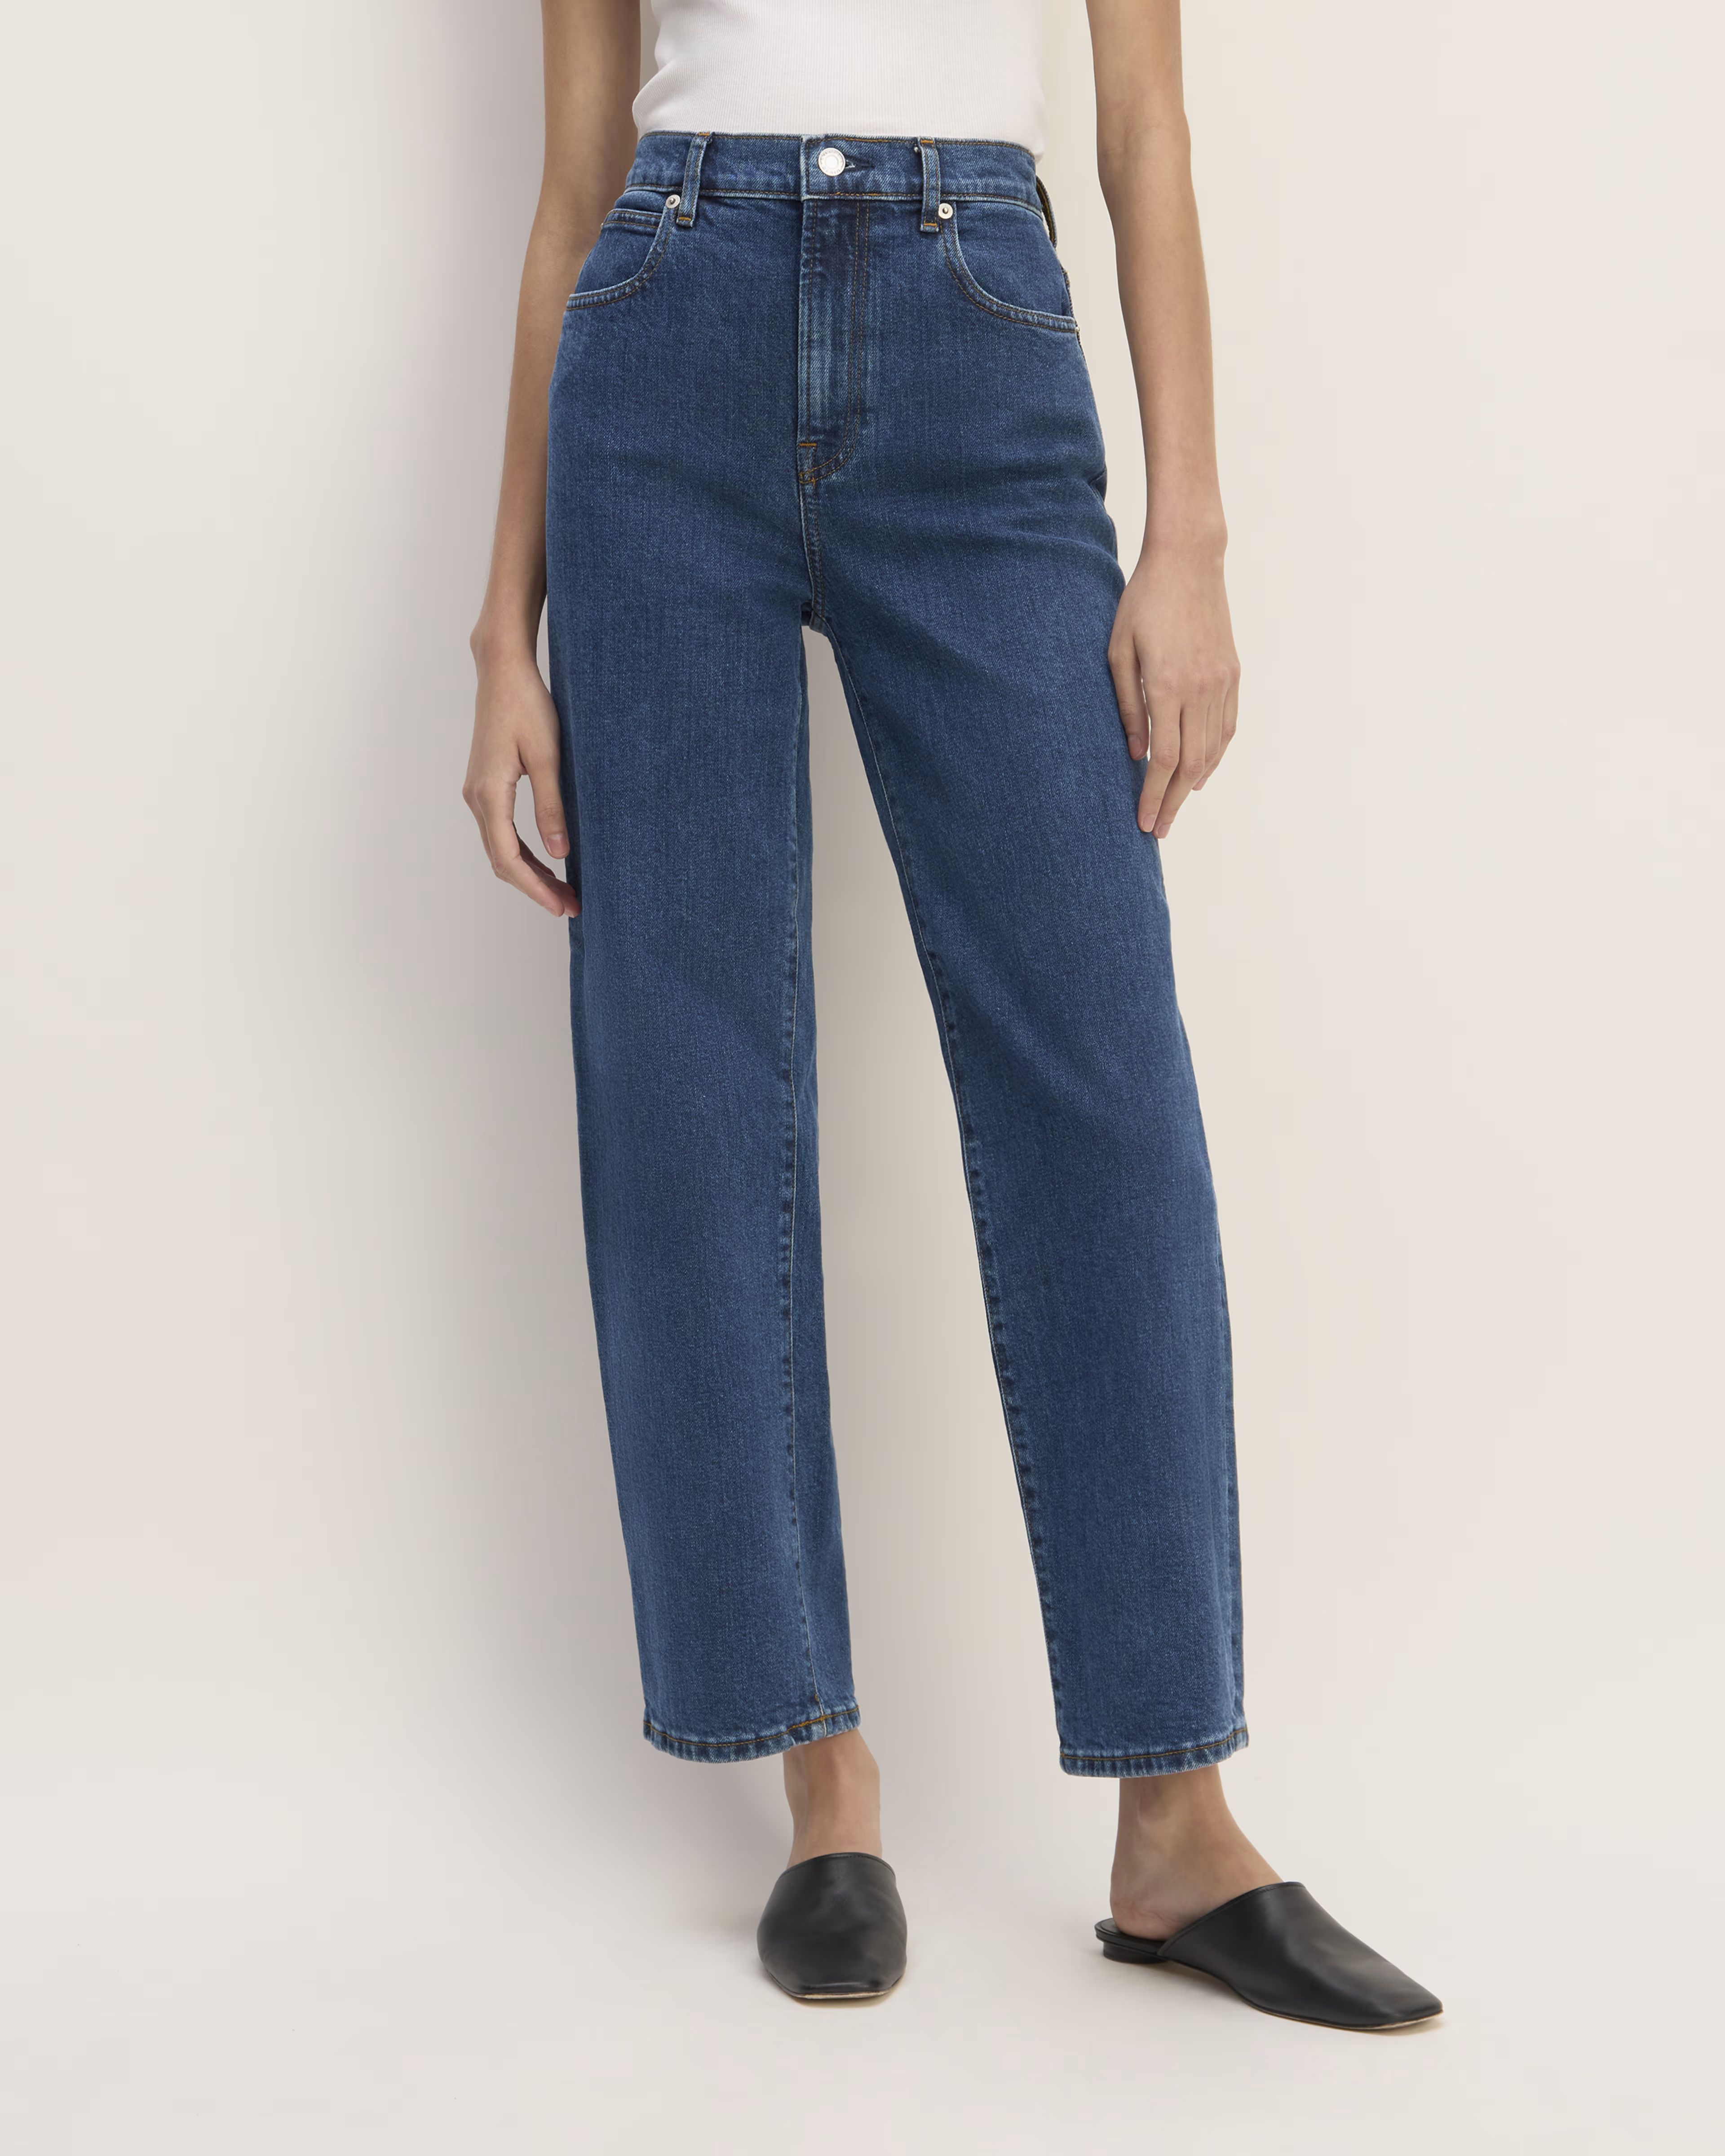 The Way-High® Jean$1184.3 (1528 Reviews)4.3 out of 5 stars. 1528 reviews Hourglass shape? Try ou... | Everlane